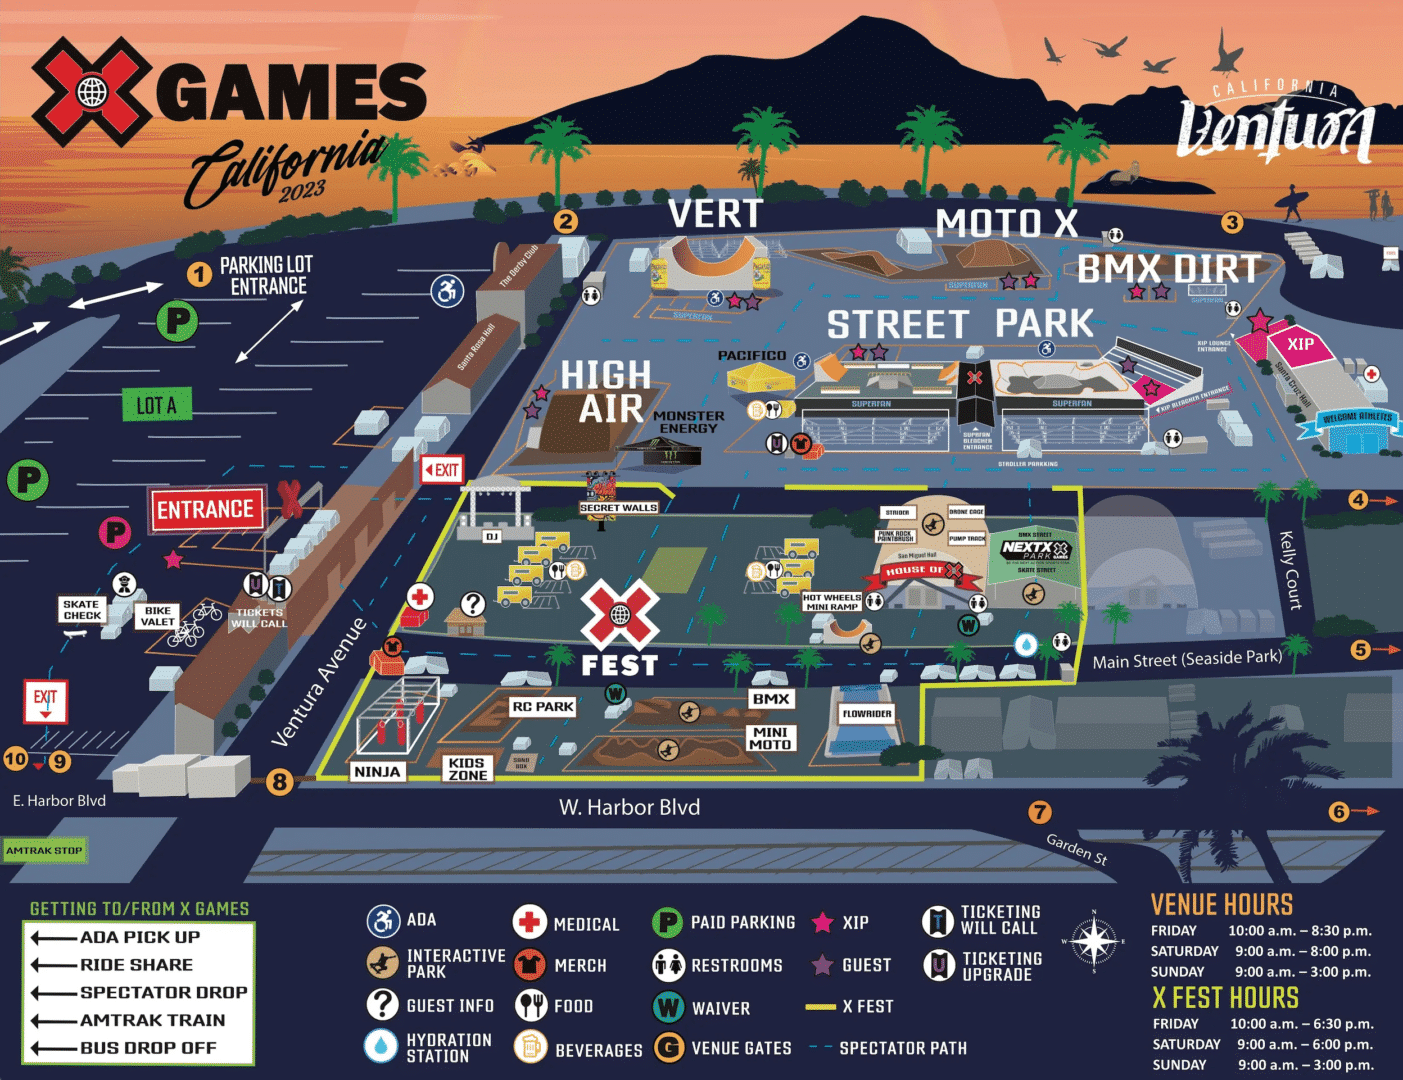 Download the Ventura X Games Event Map